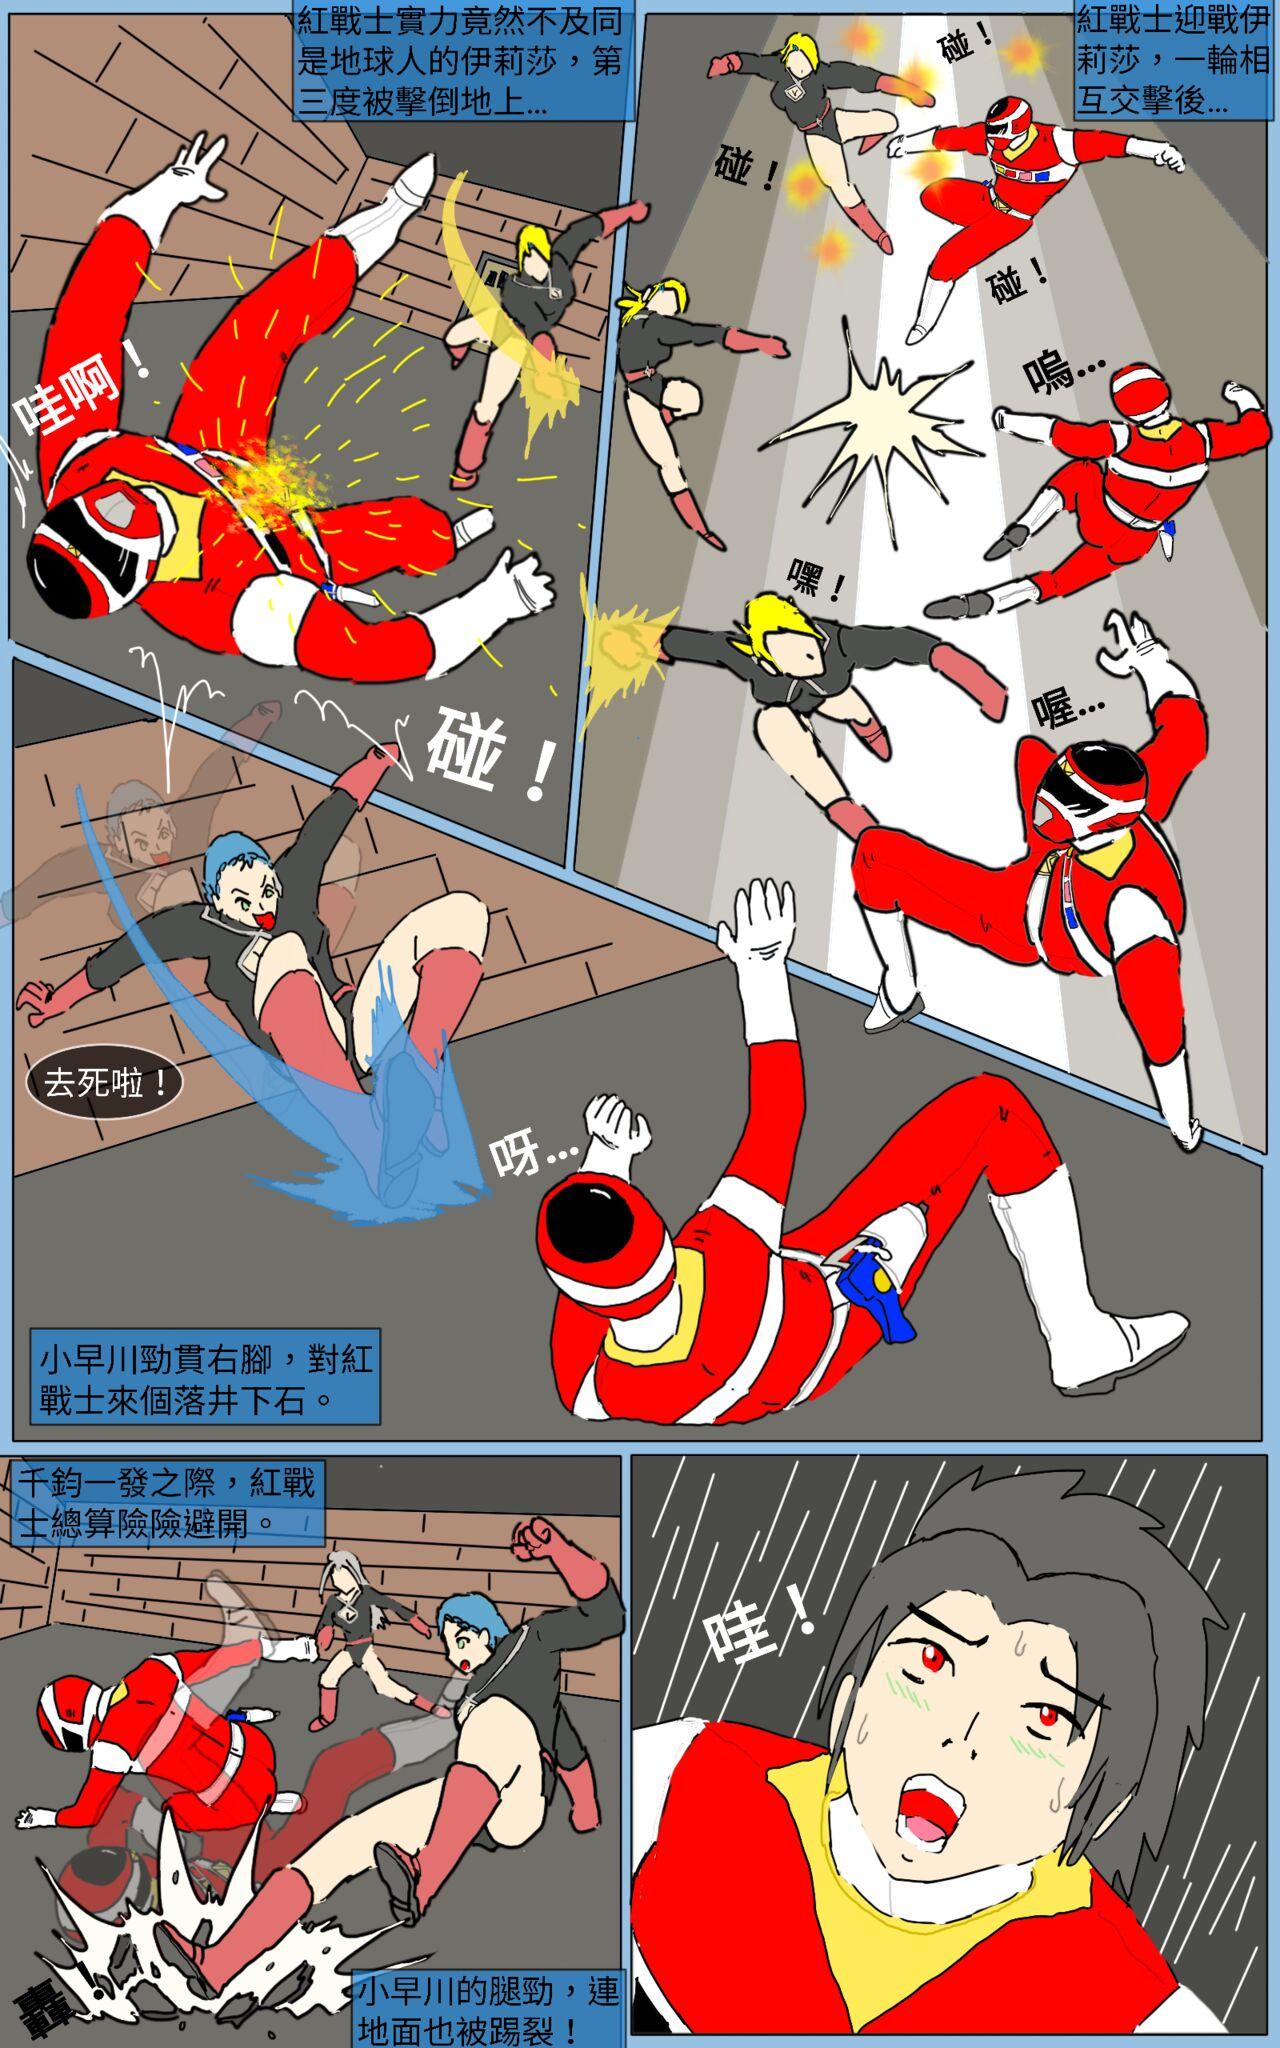 Foda Mission 18 - Super sentai With - Page 10